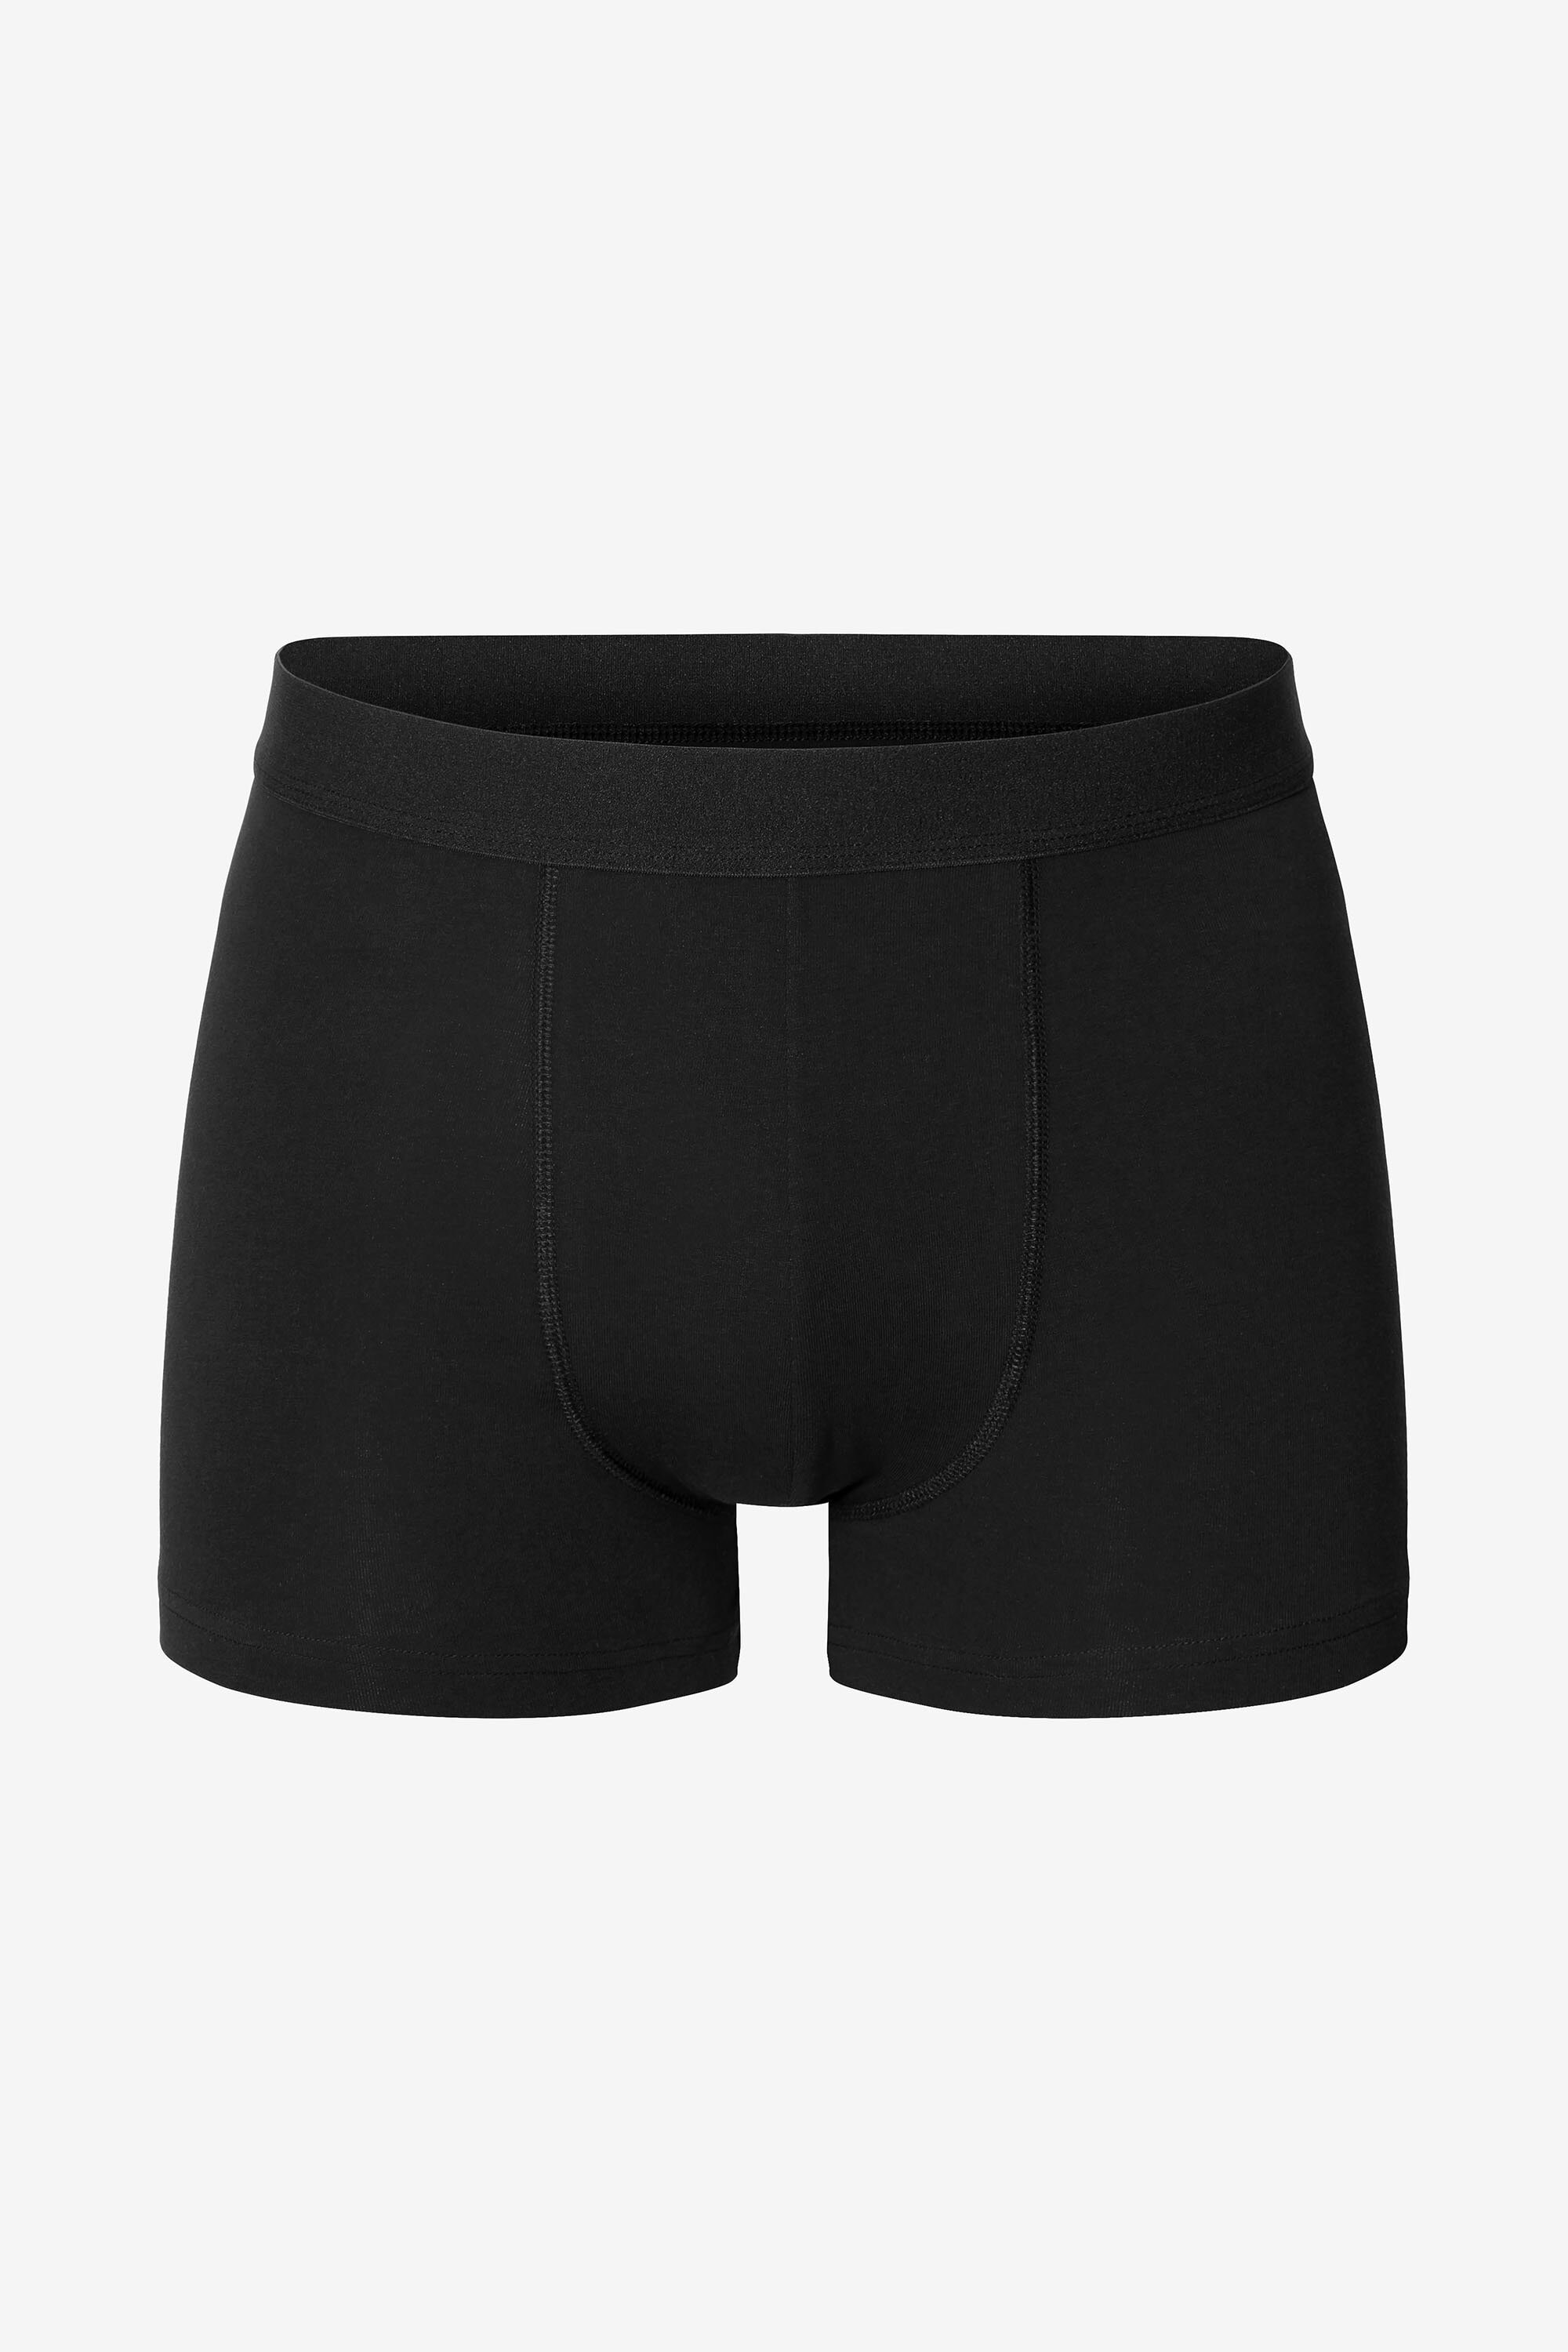 White organic cotton thong for ladies - Bread & Boxers